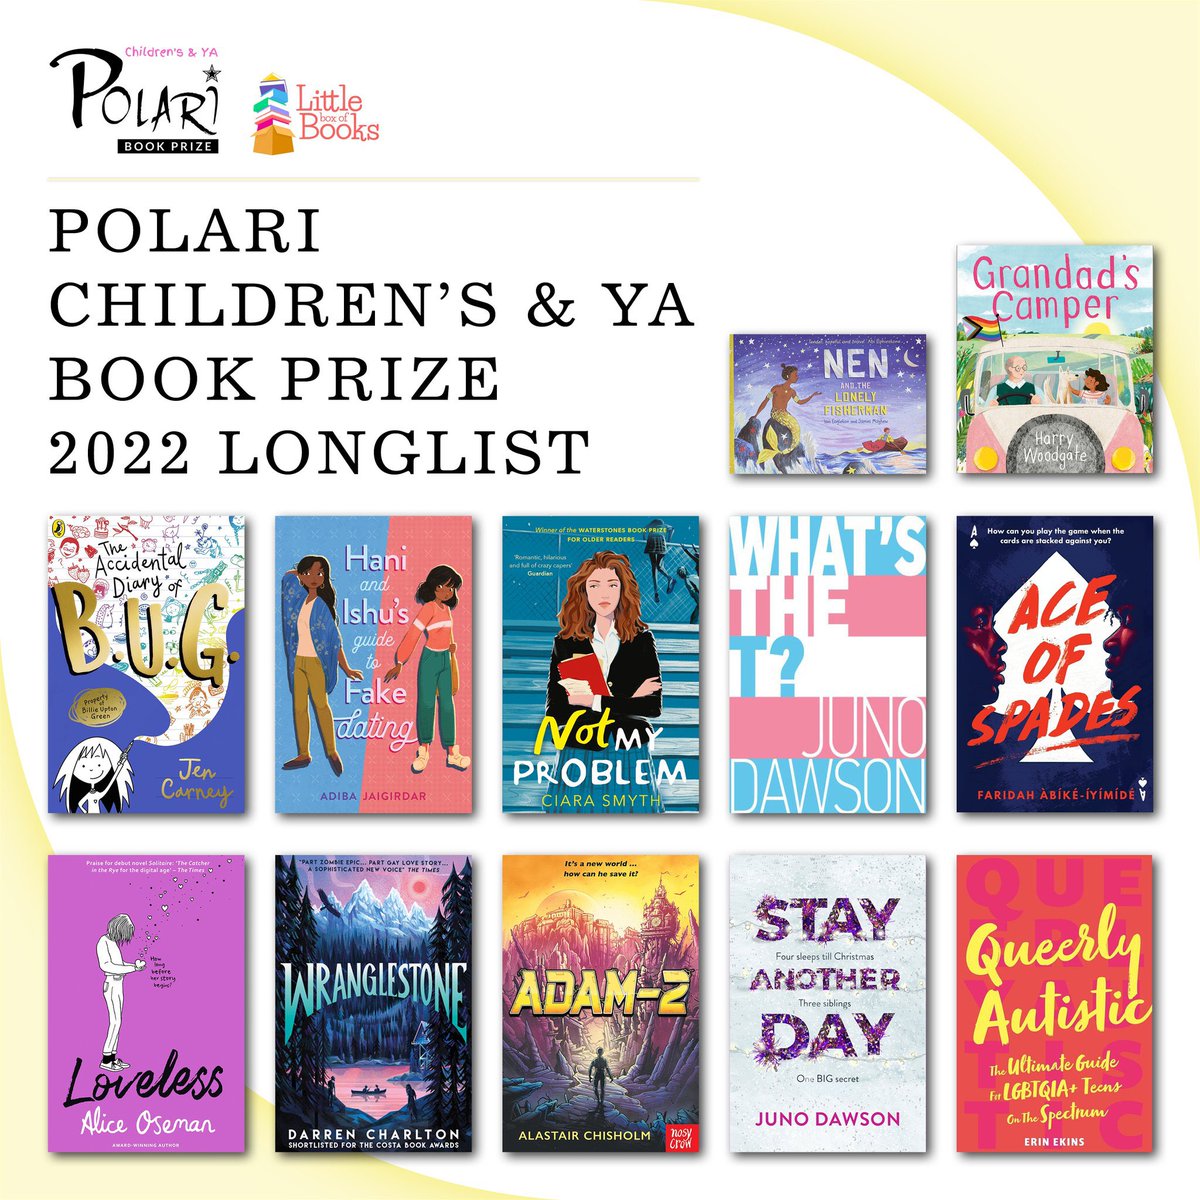 HUGE congratulations to all the fabulous @PolariPrize longlisted writers. Looking for new books to read? These lists are always to be trusted ❤️ #polariprize